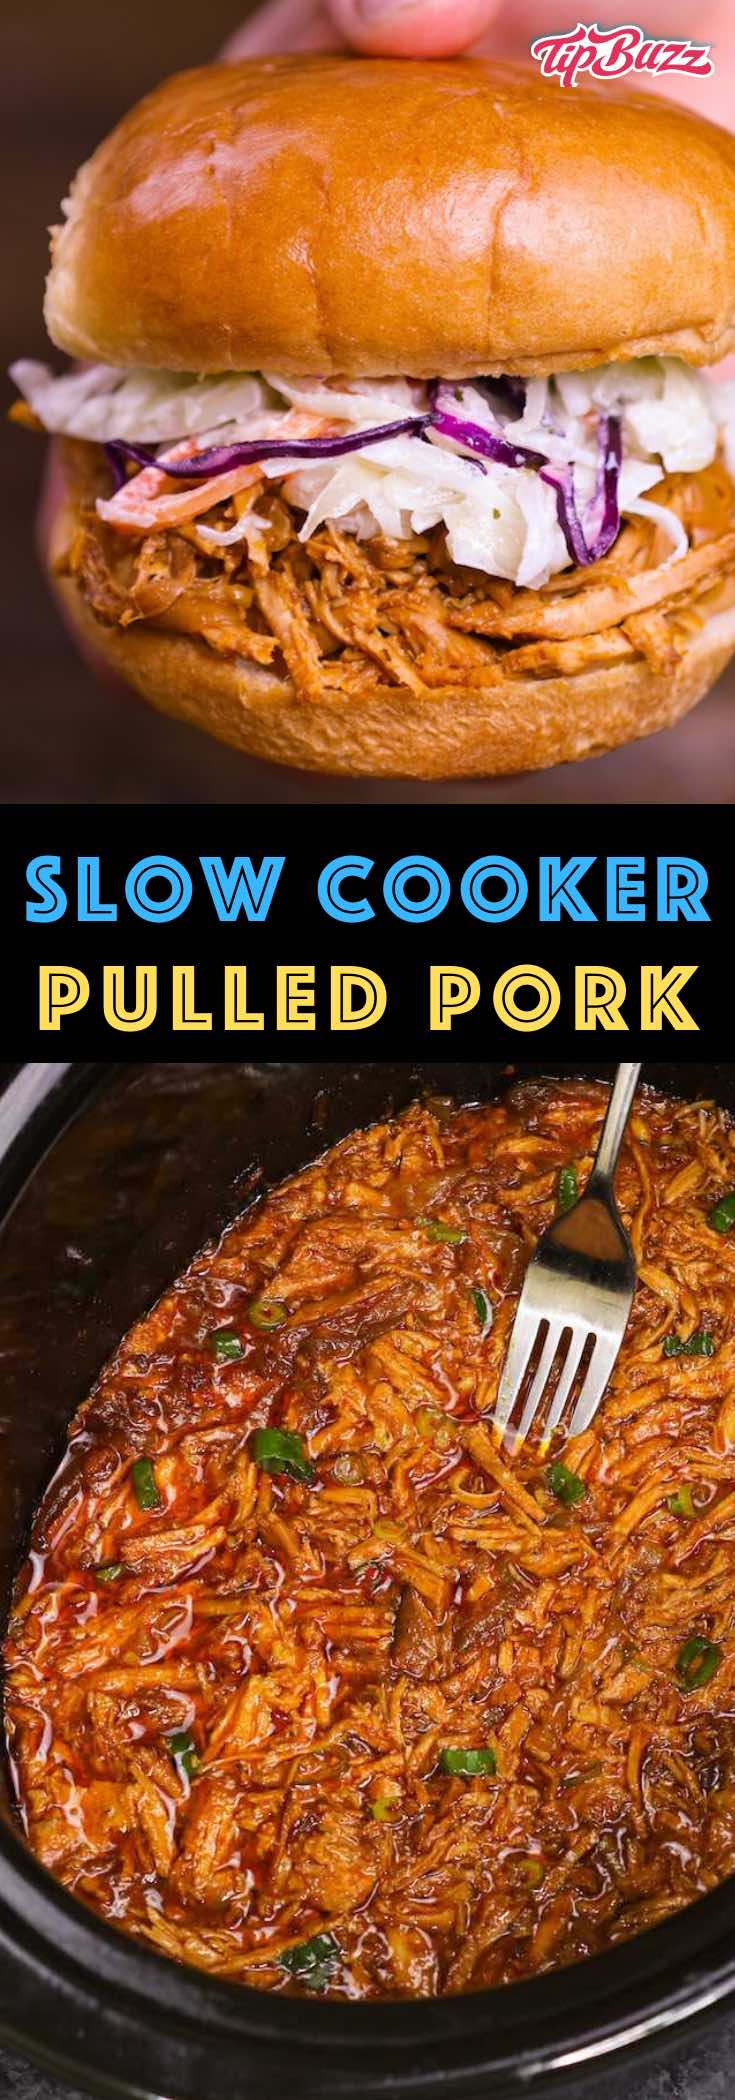 This Slow Cooker Pulled Pork is the tenderest and most flavorful homemade barbecue with no smoking required. It’s a budget-friendly meal that's easy to make with only 10 minutes of prep. Perfect for a party! #SlowCookerPulledPork